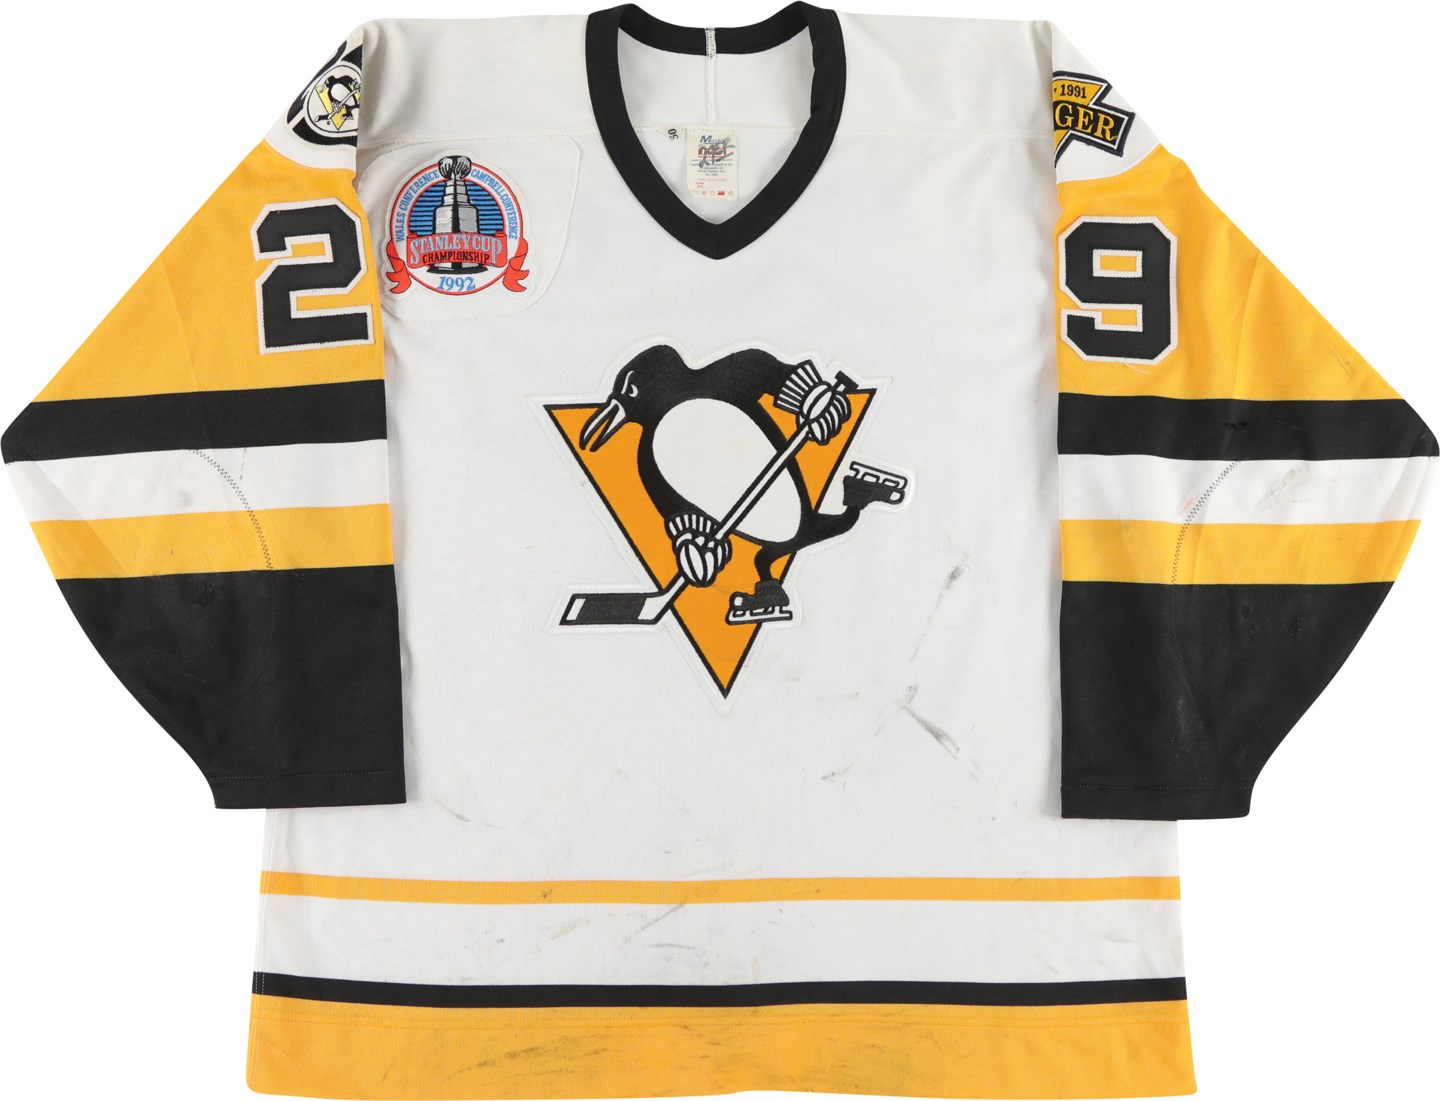 - 1992 Phil Bourque Stanley Cup Finals Game 1 Pittsburgh Penguins Game Worn Jersey - Bourque's Final Playoff Goal (Photo-Matched & Bourque LOA)